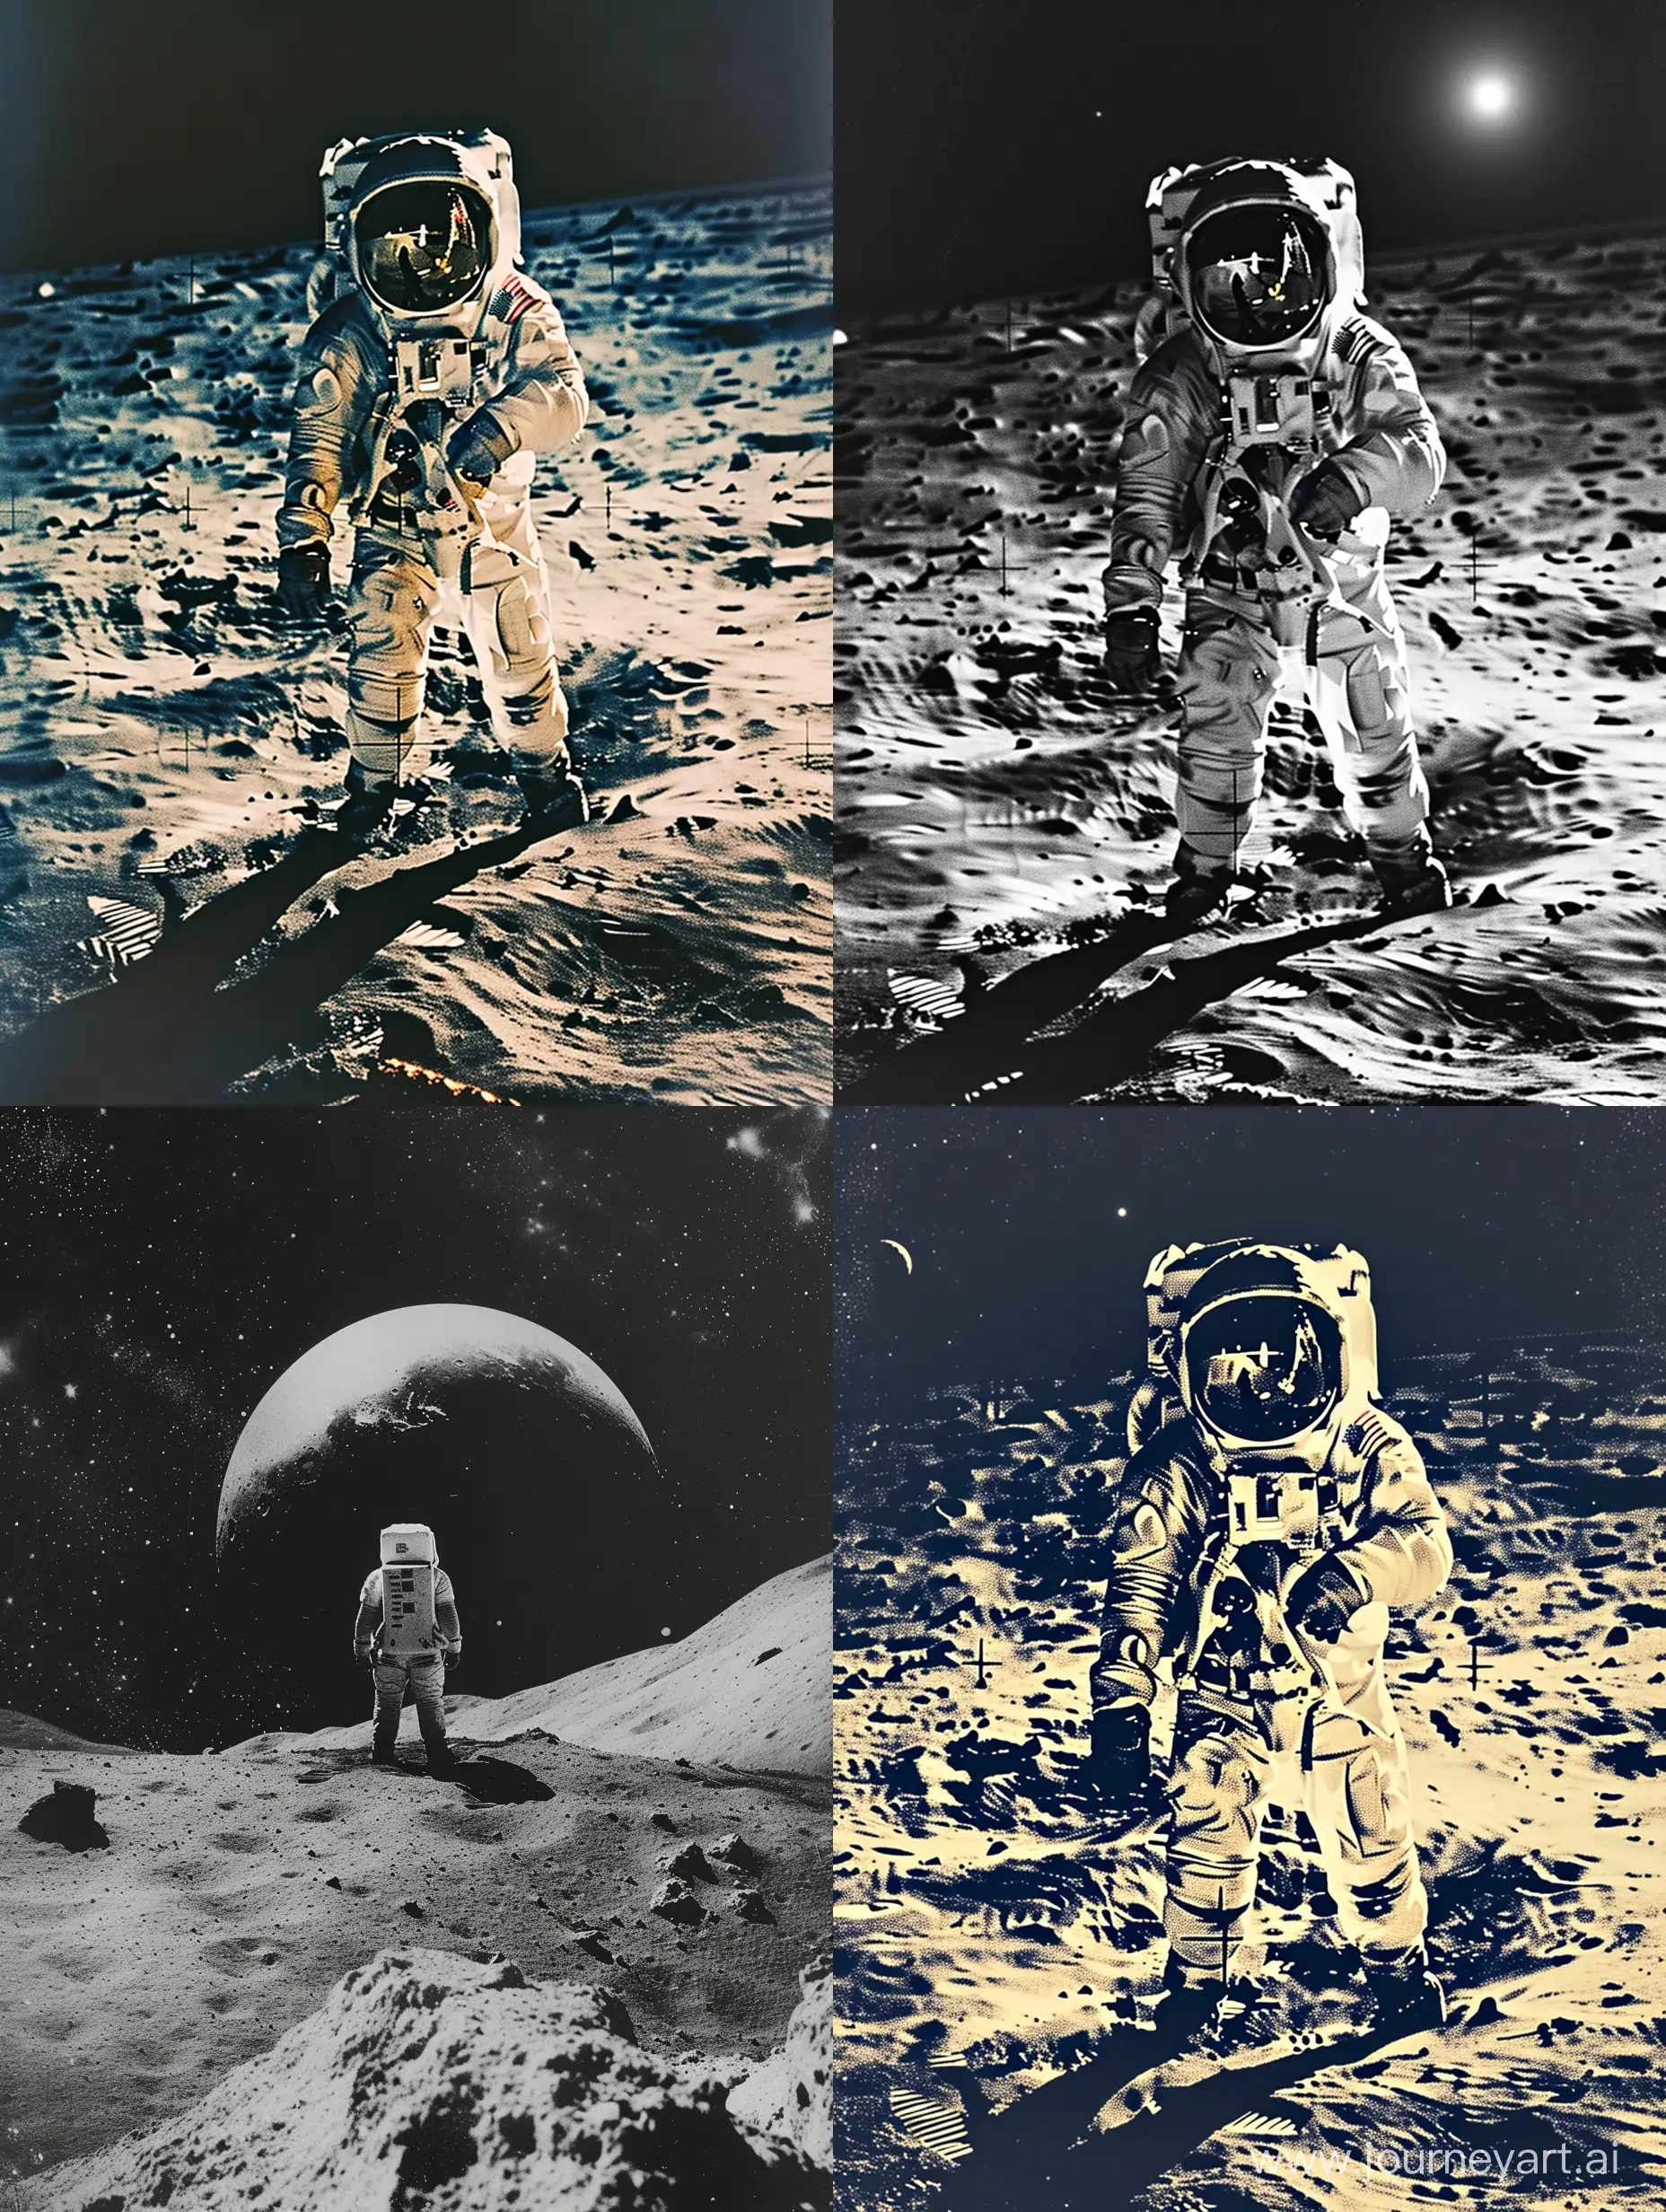 Exploring-the-Lunar-Surface-Astronaut-on-the-Moon